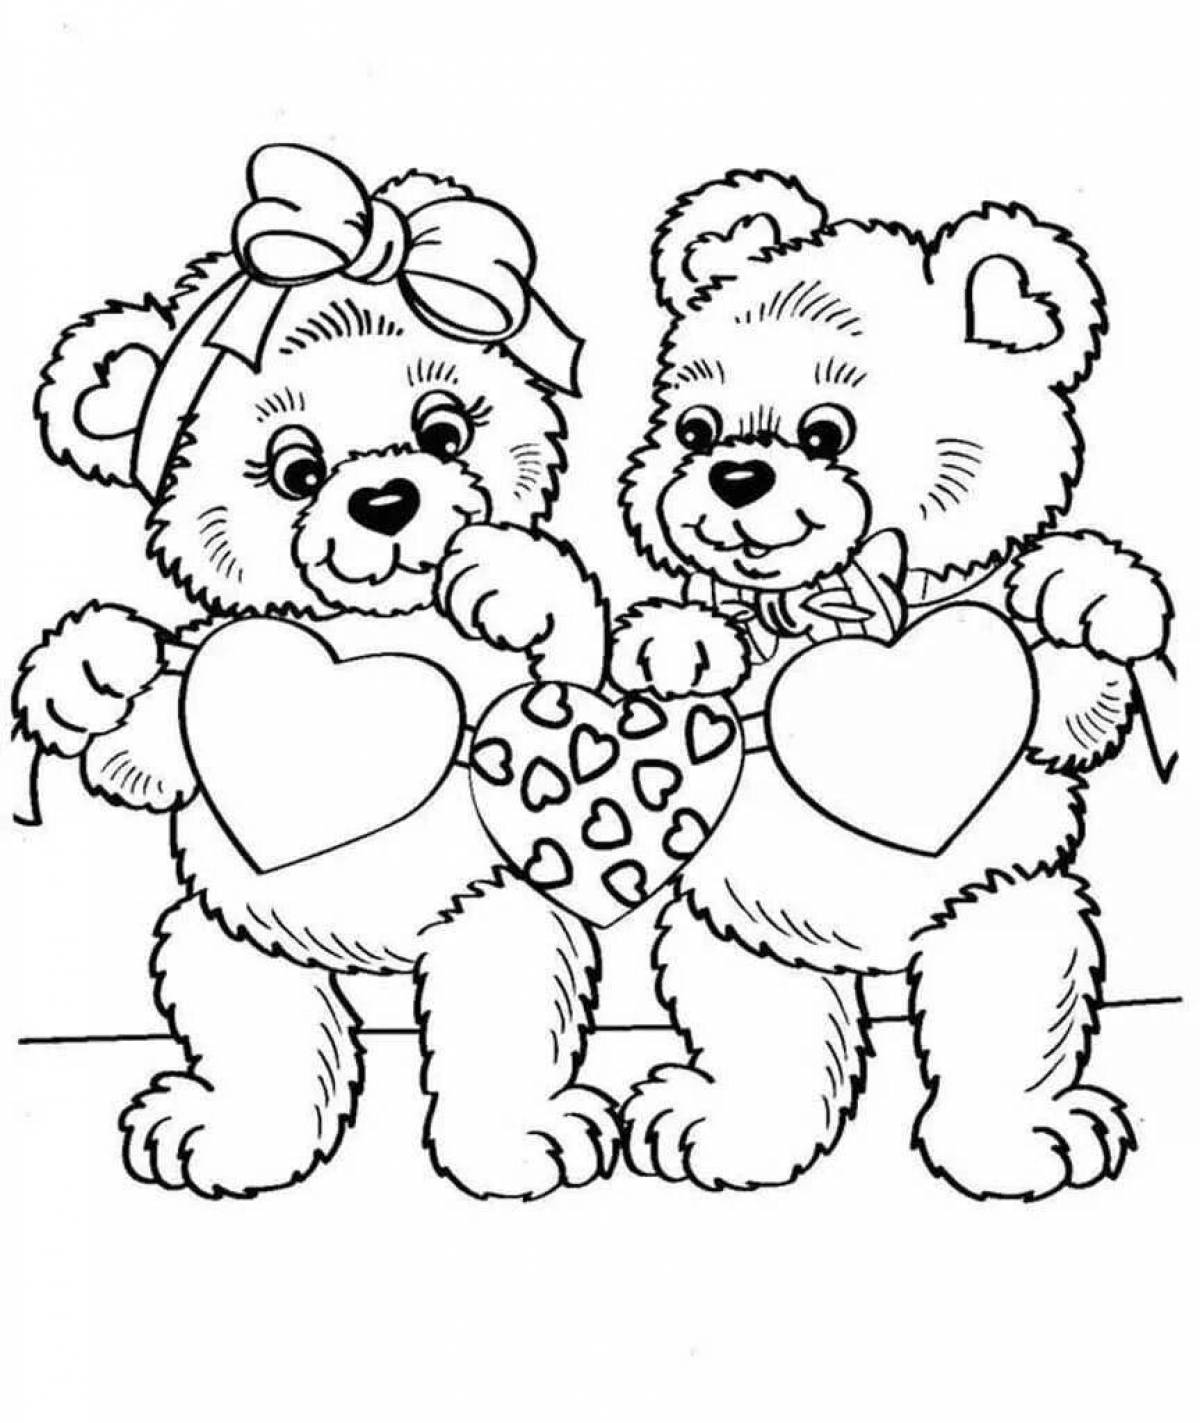 Coloring book smiling teddy bear with heart